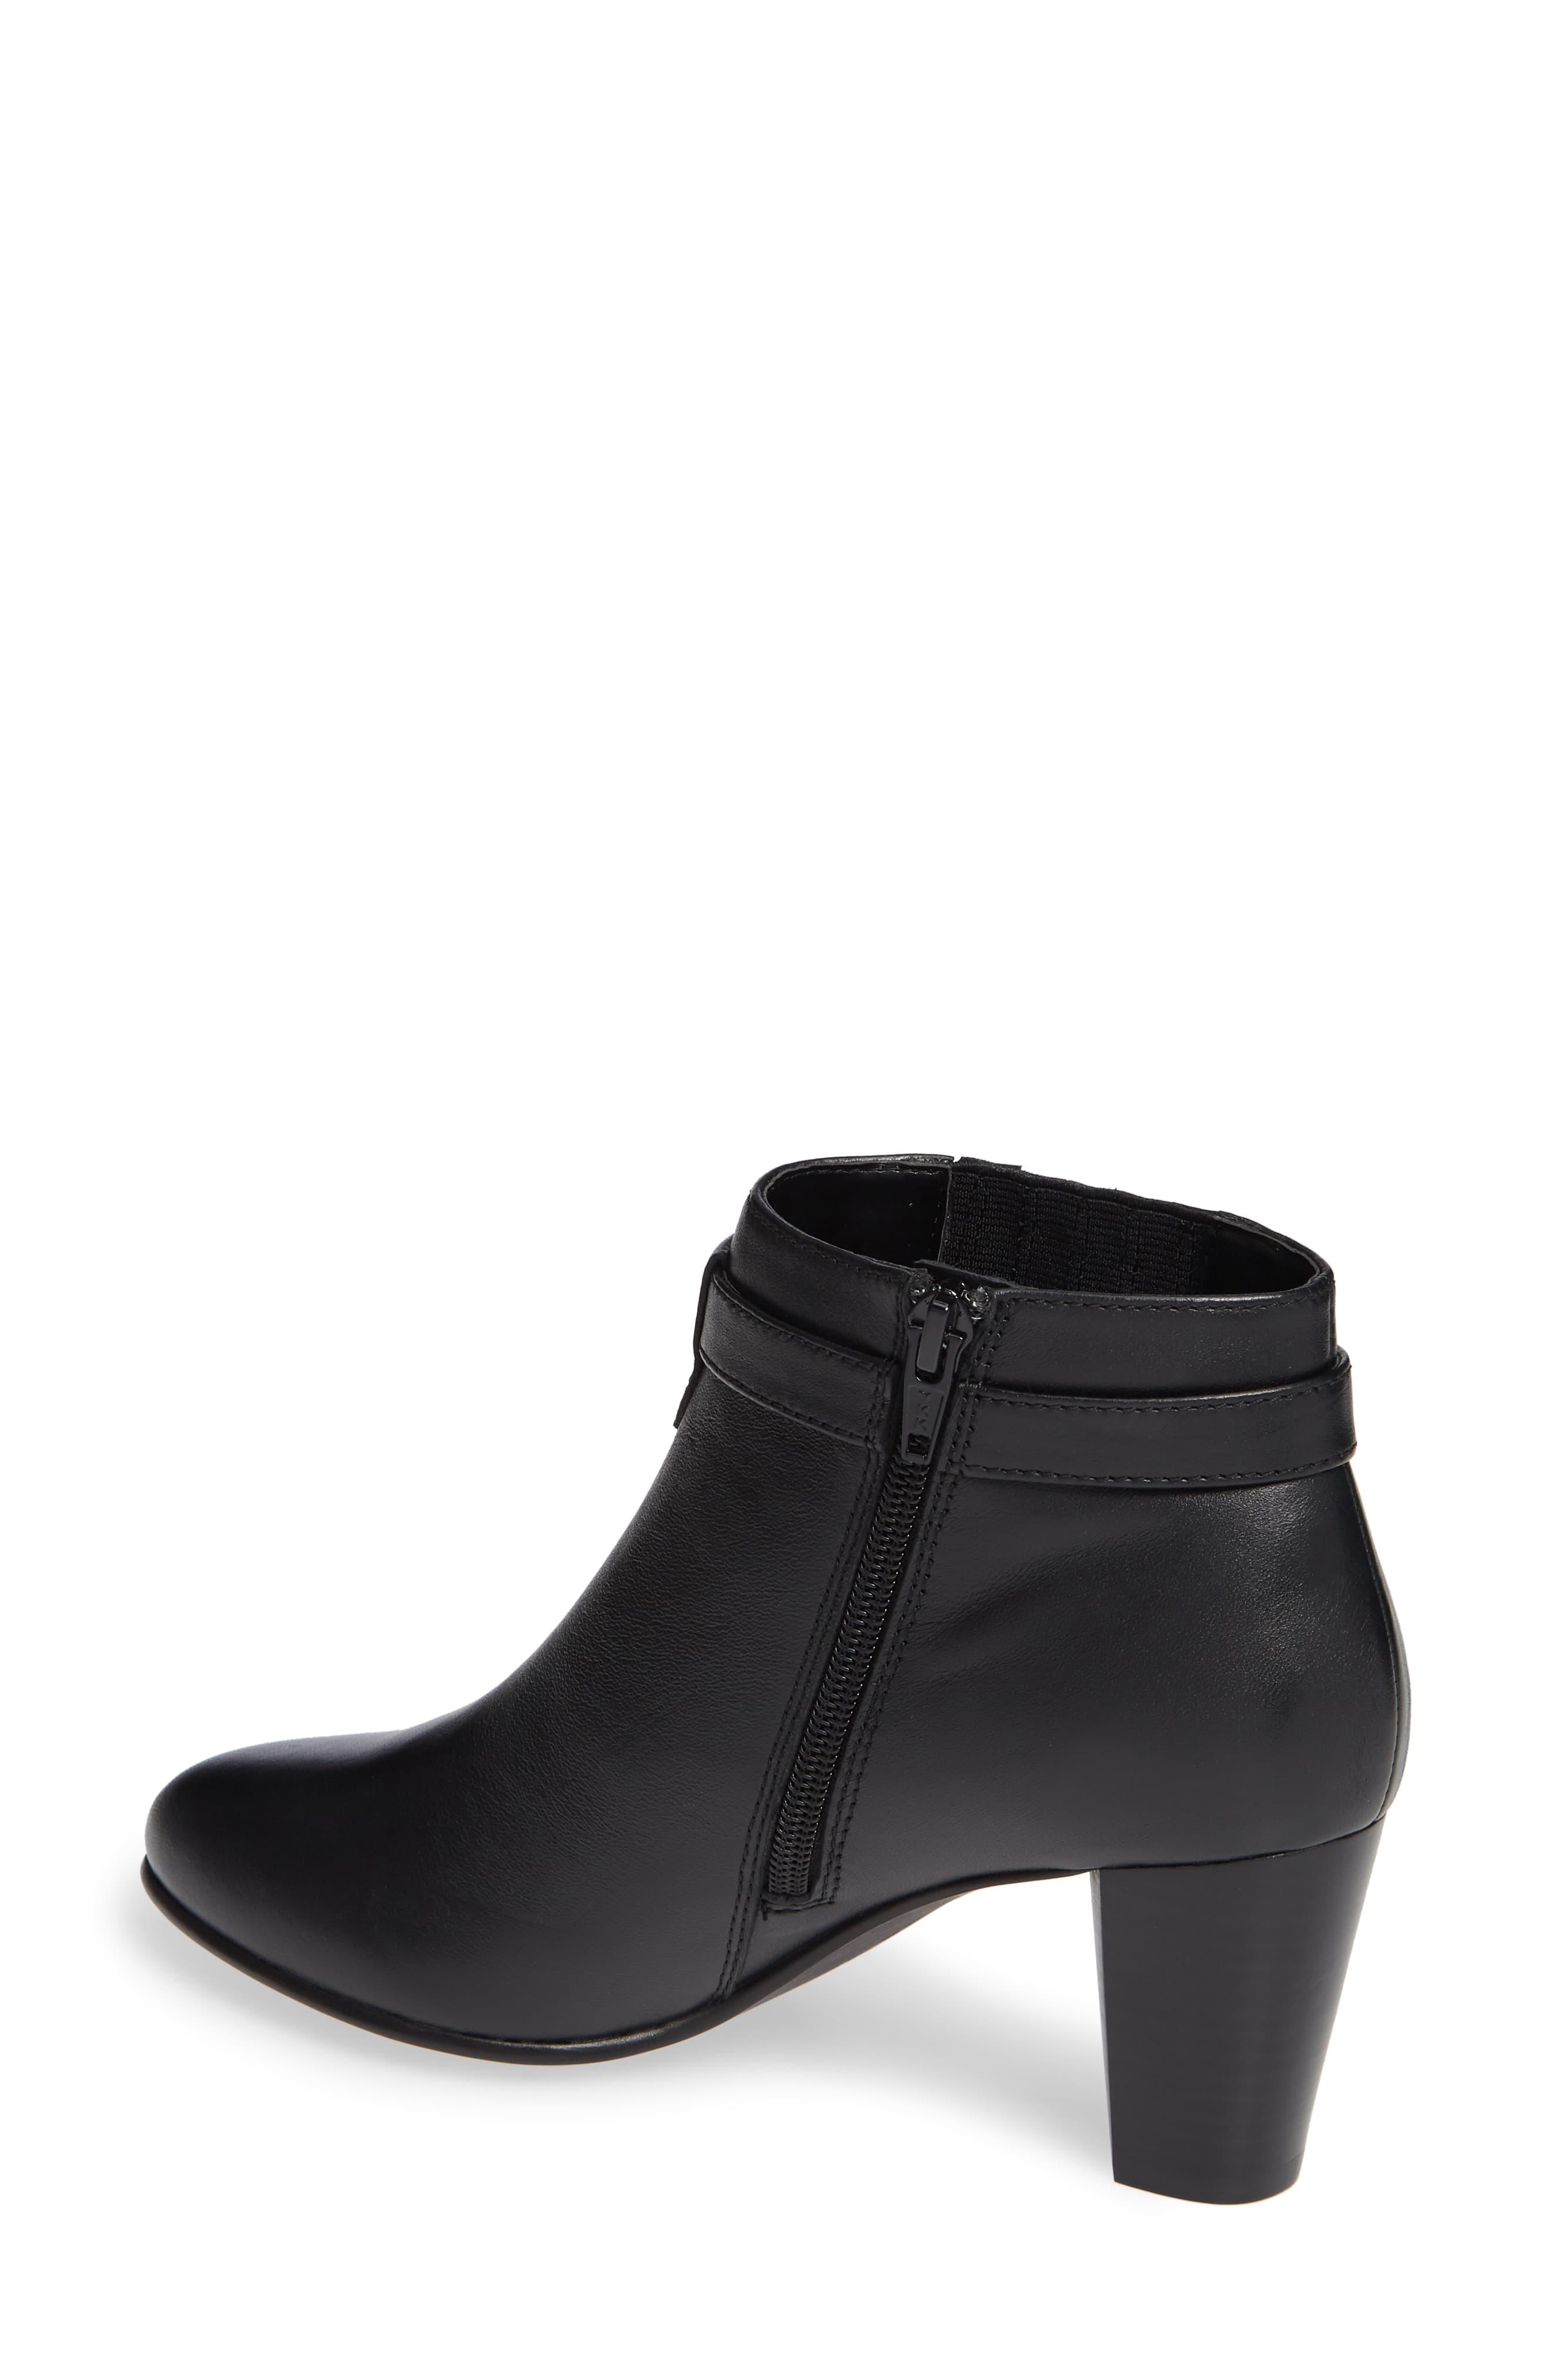 David Tate Opal Bootie in Black Leather 